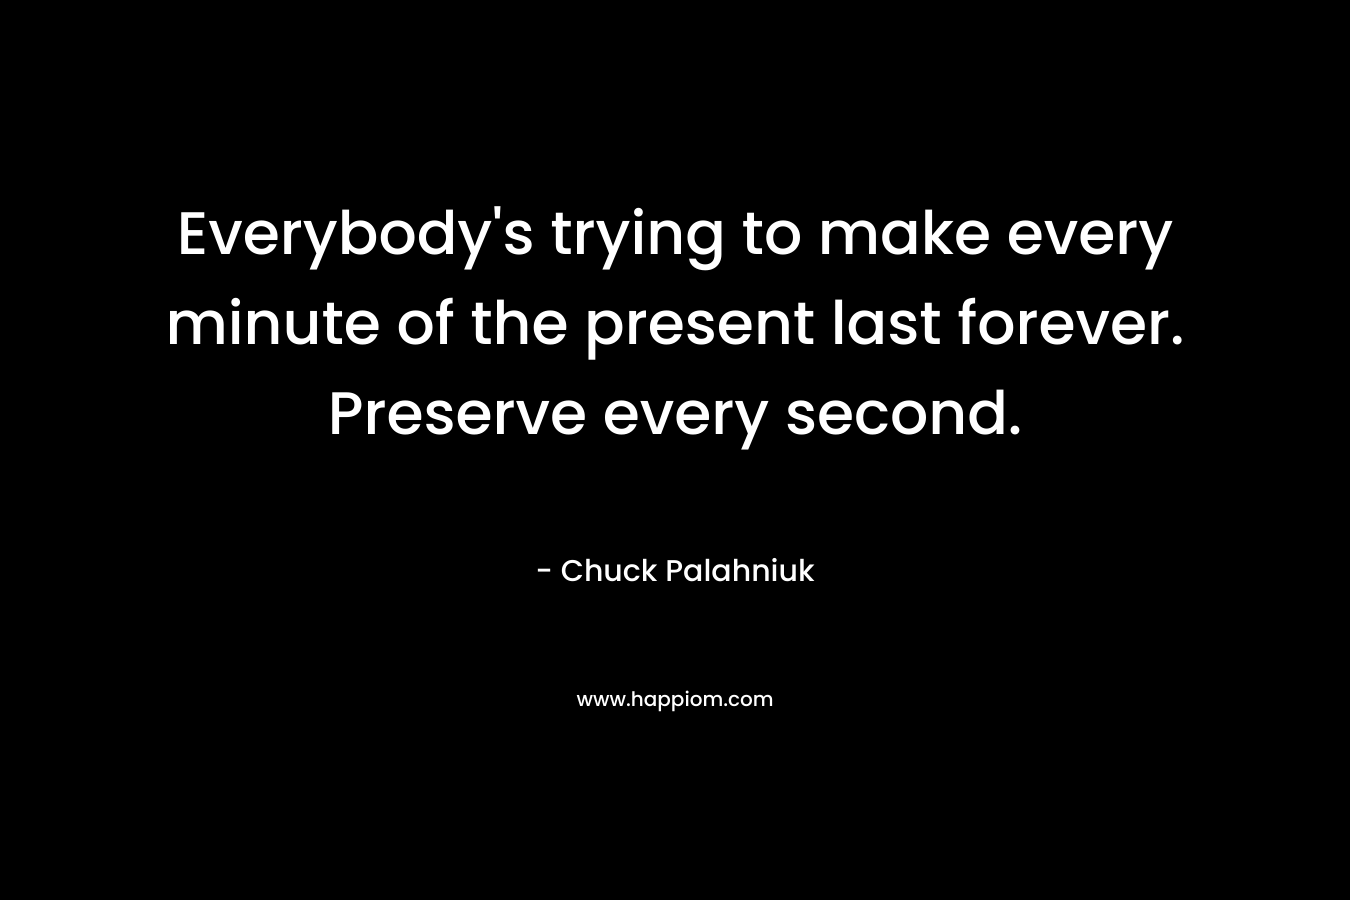 Everybody’s trying to make every minute of the present last forever. Preserve every second. – Chuck Palahniuk